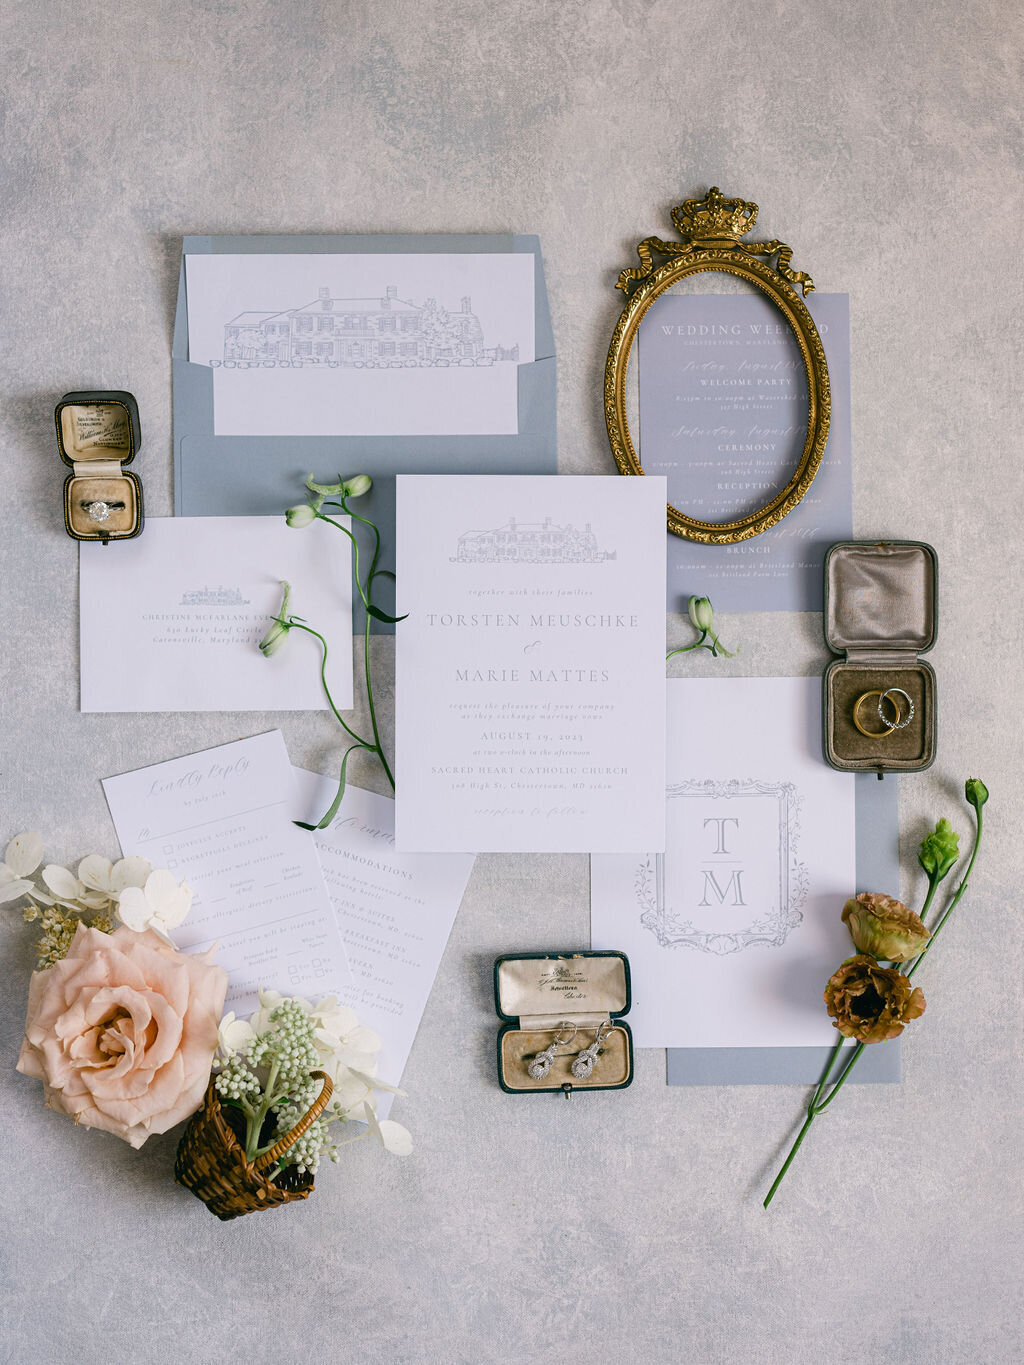 Flatlay photo of invitations and wedding details including floral accents of peach roses, white hydrangea and brown lisianthus, rings and jewelry.